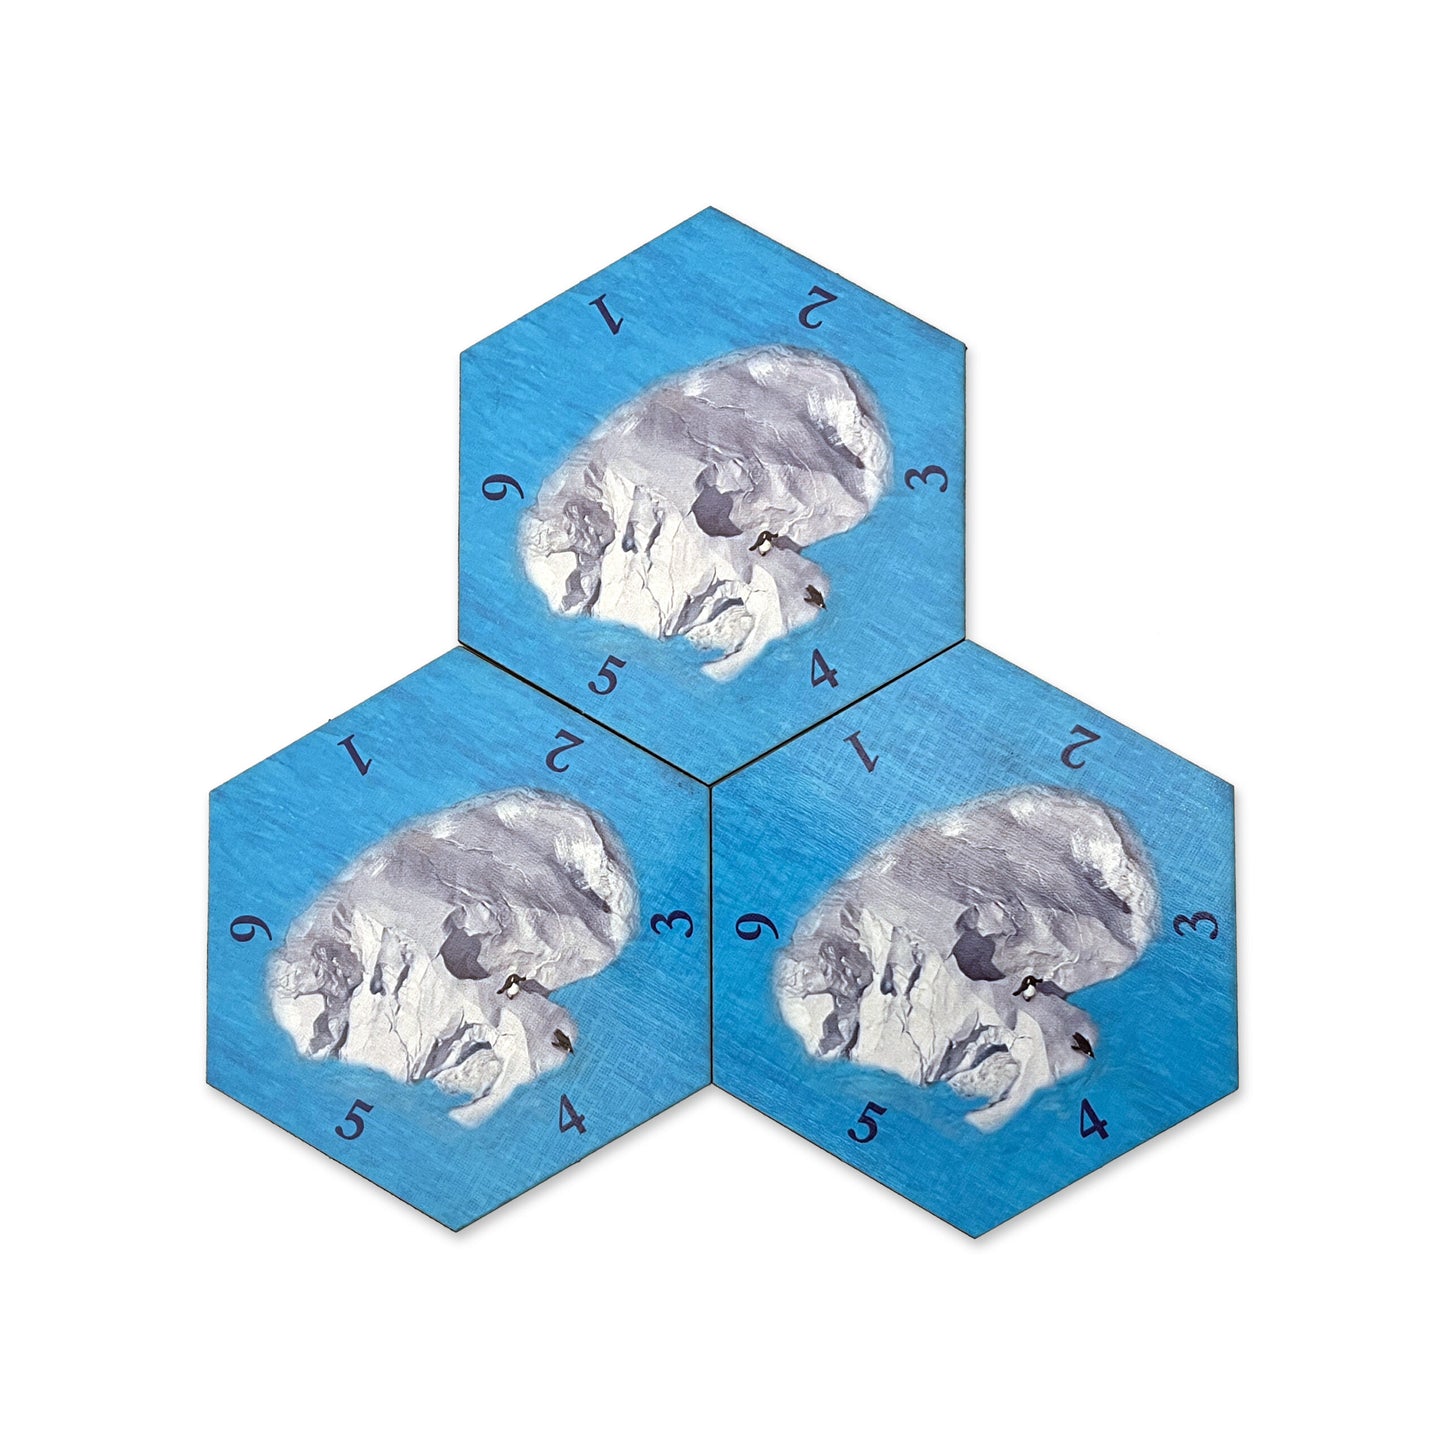 Iceberg Ocean Sea Hex 3-Pack compatible with Catan's Settlers of Catan Seafarers, Cities and Knights and Catan Expansions